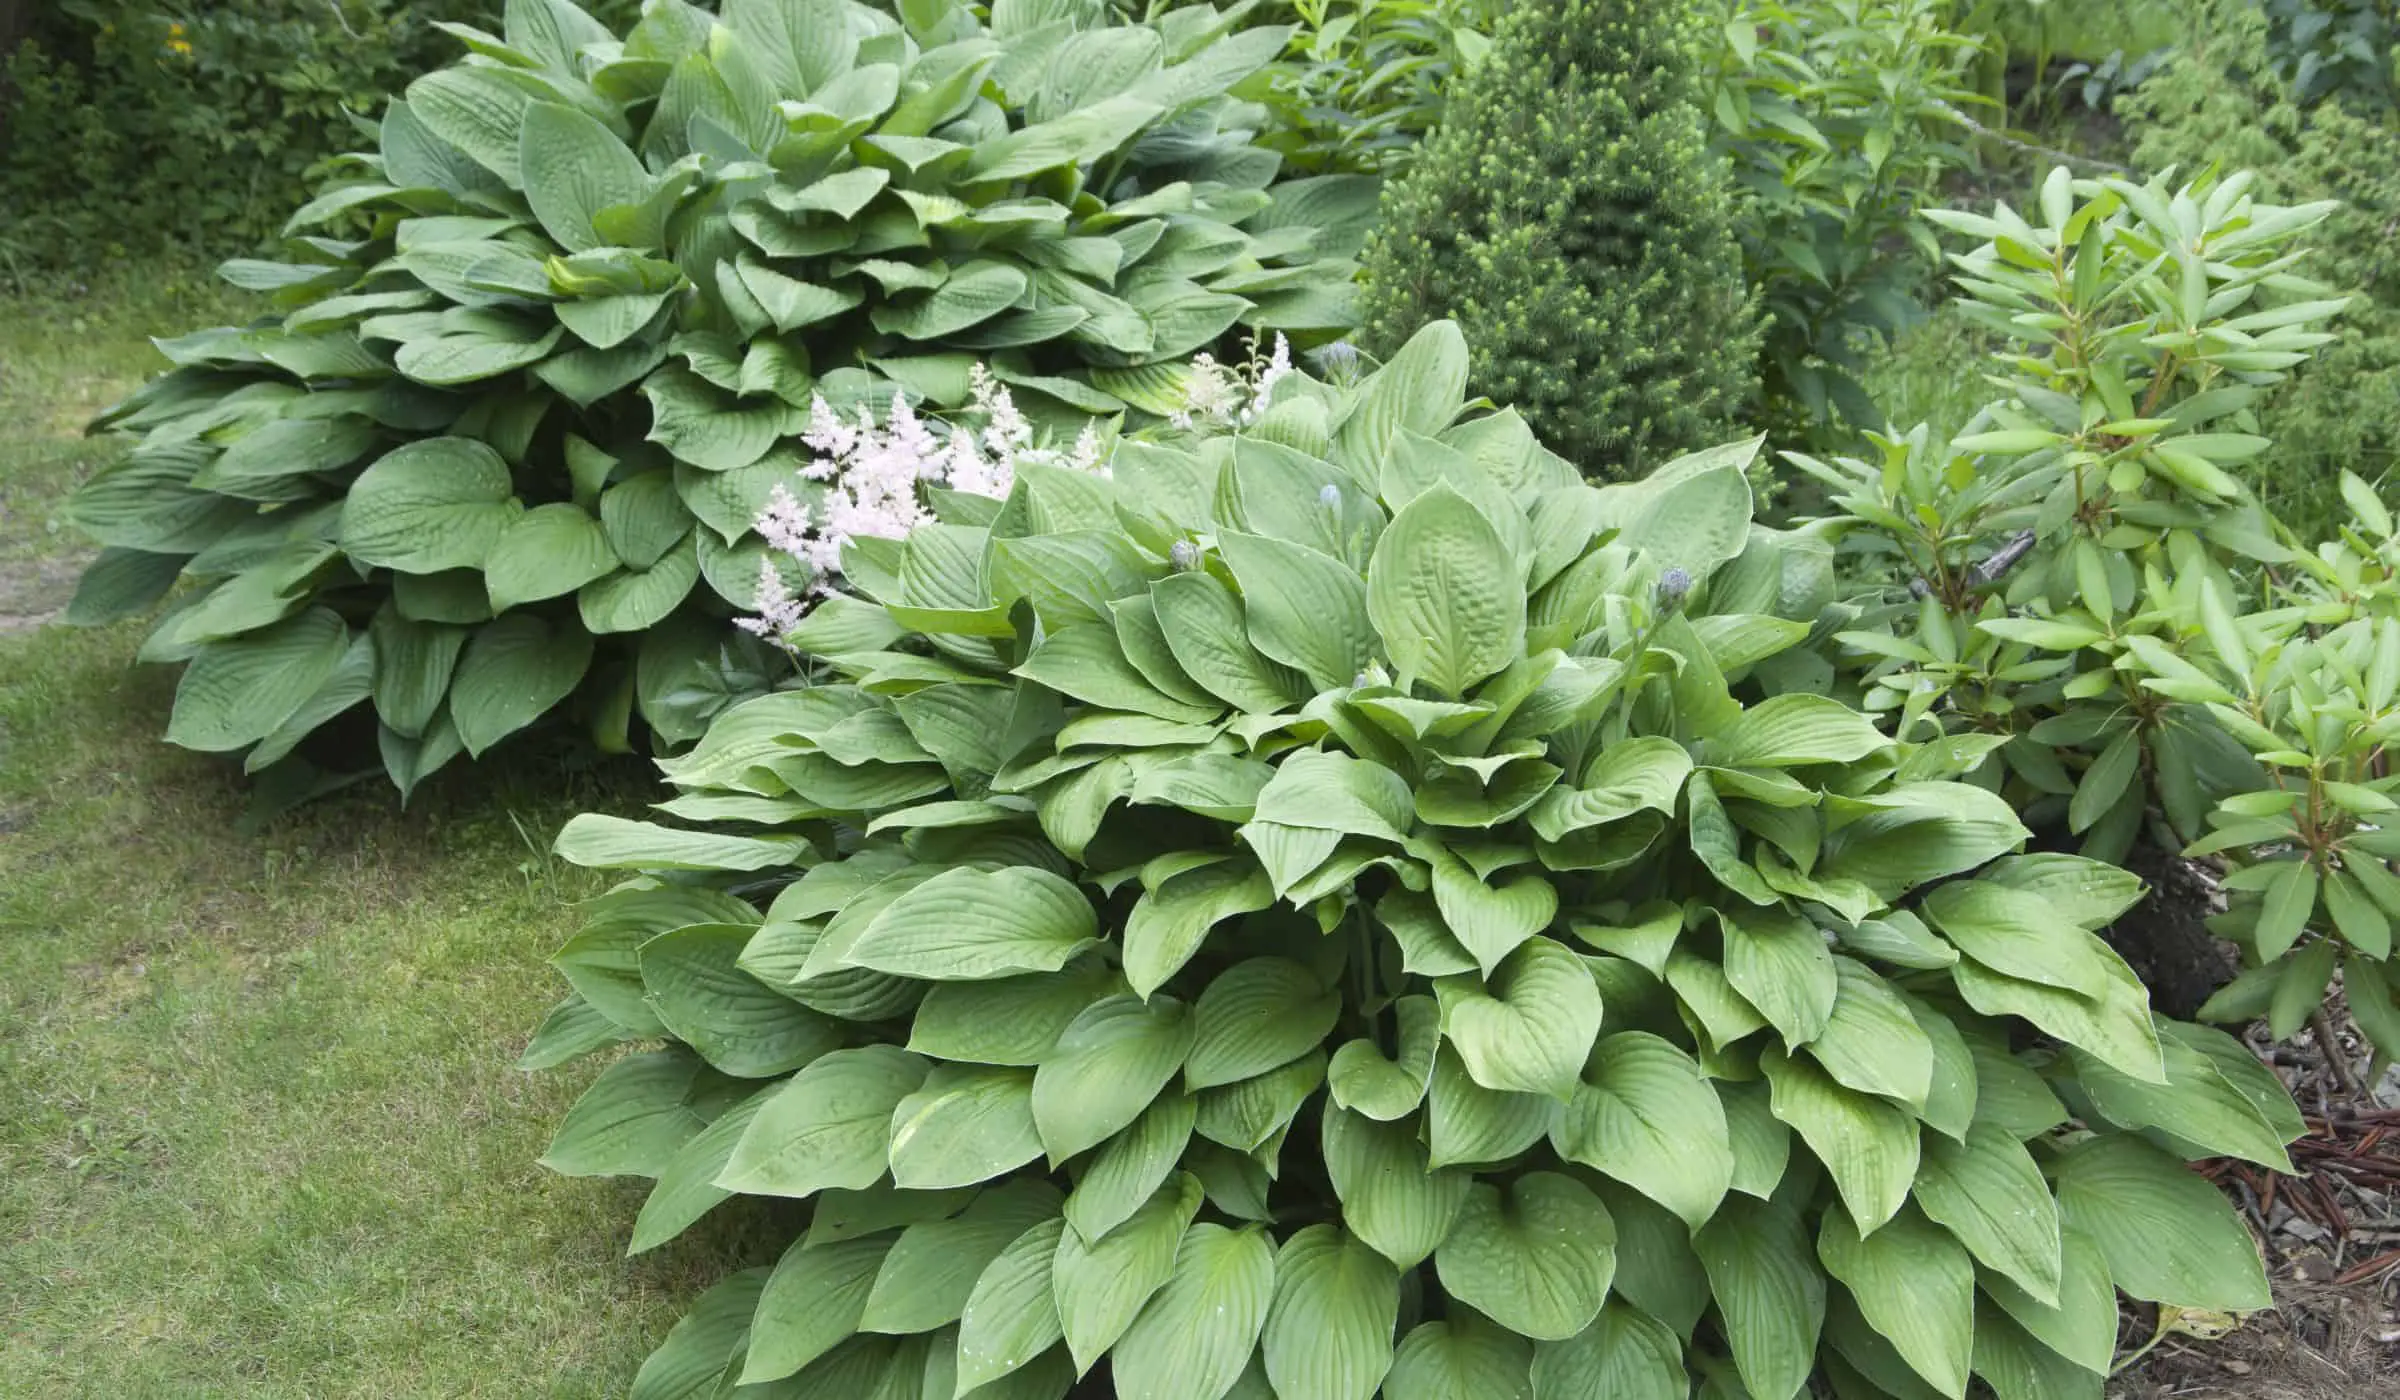 Two large hosta plants in the garden